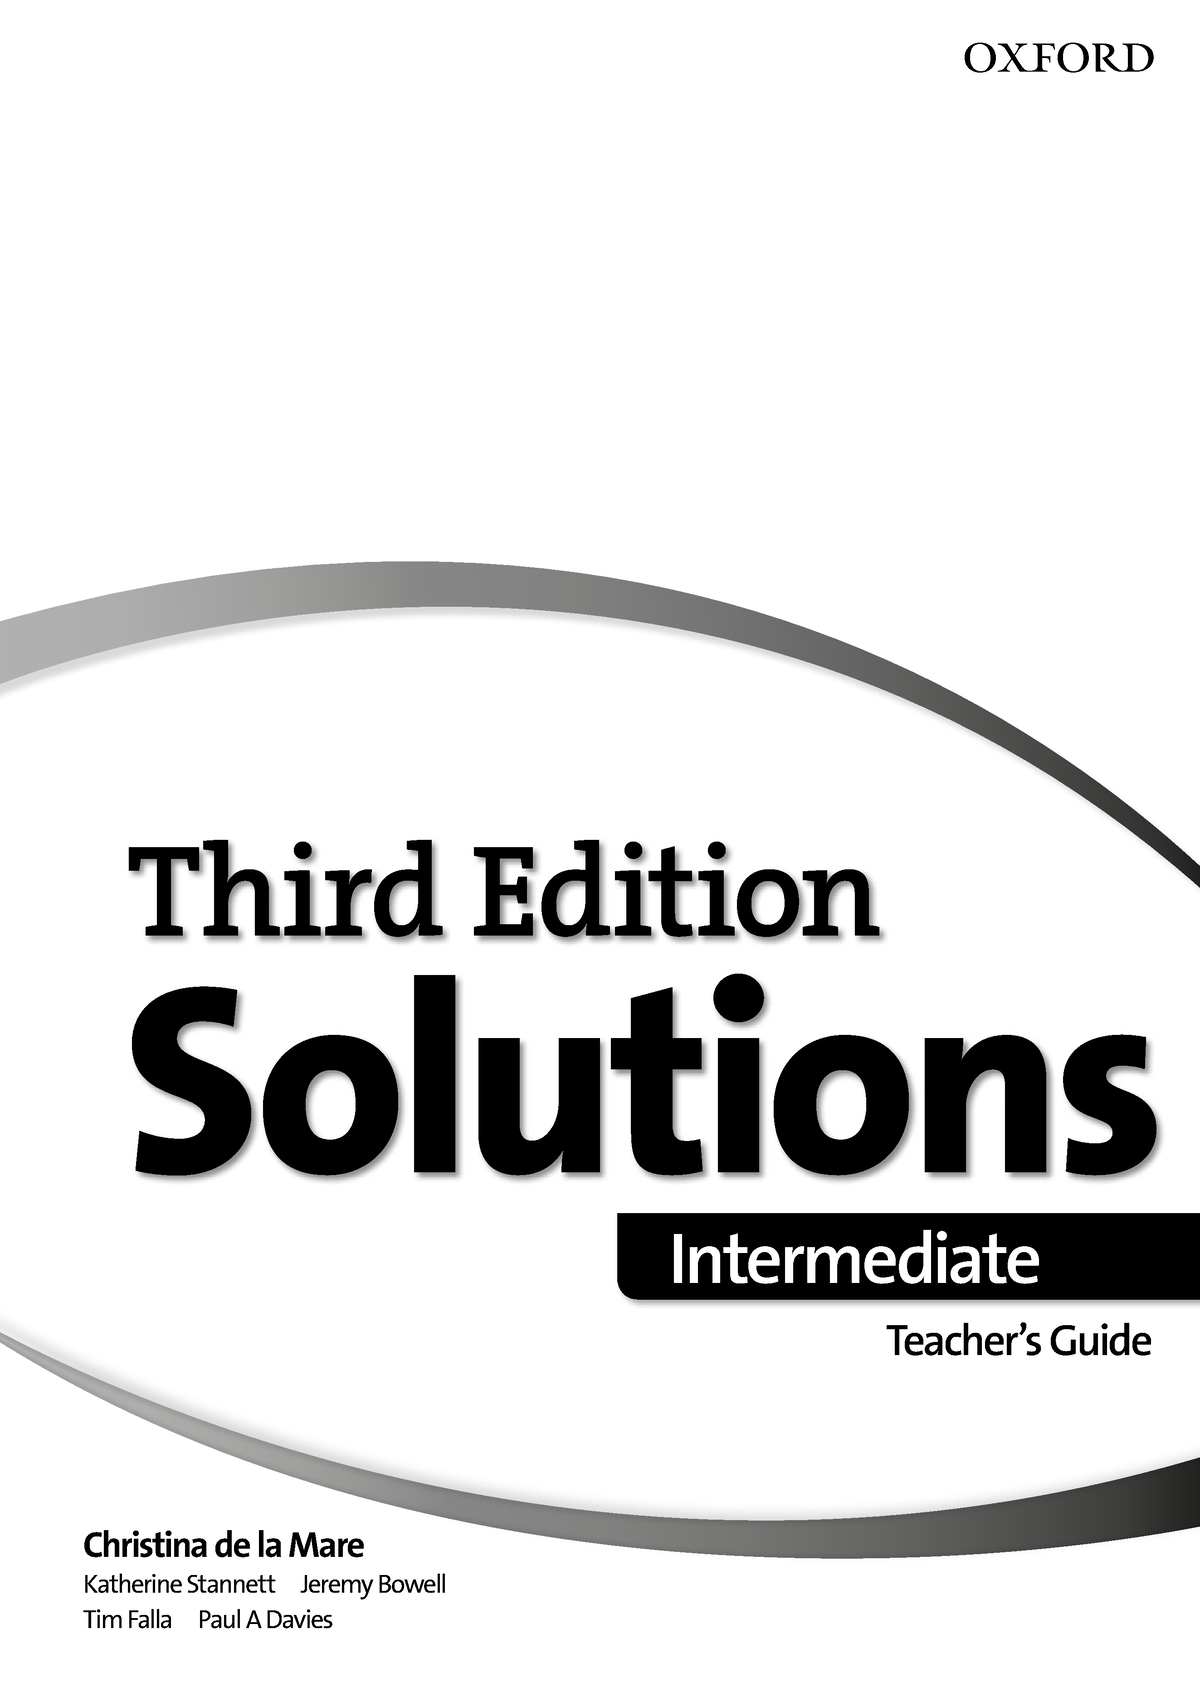 Prix Comp titif Avec Complet Student s Book Solutions 3rd Edition 